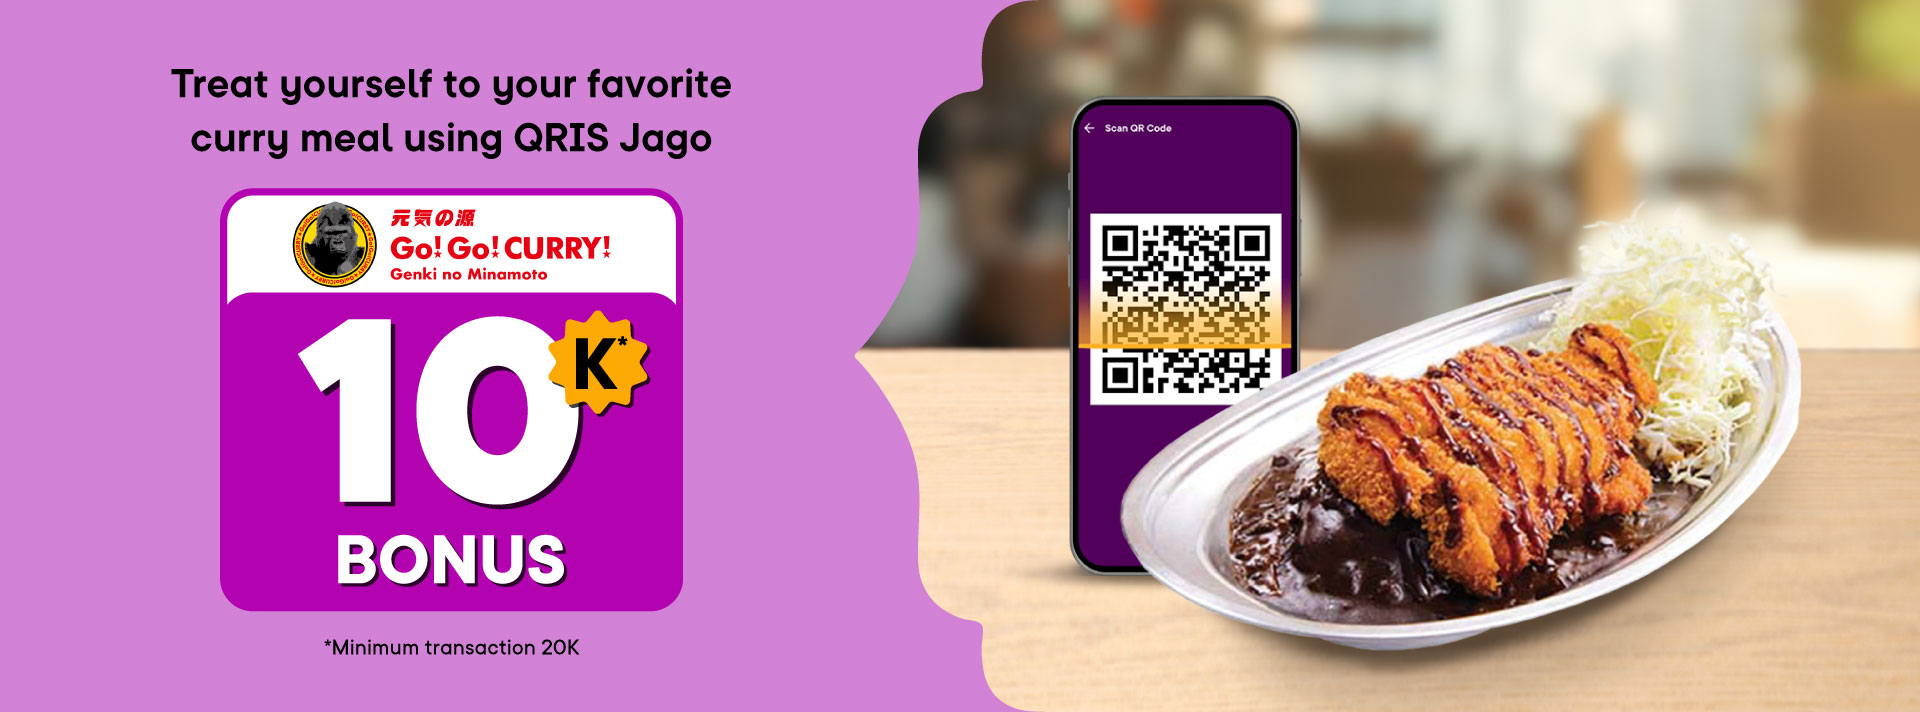 Rp10,000 cashback for curry food using Jago QRIS